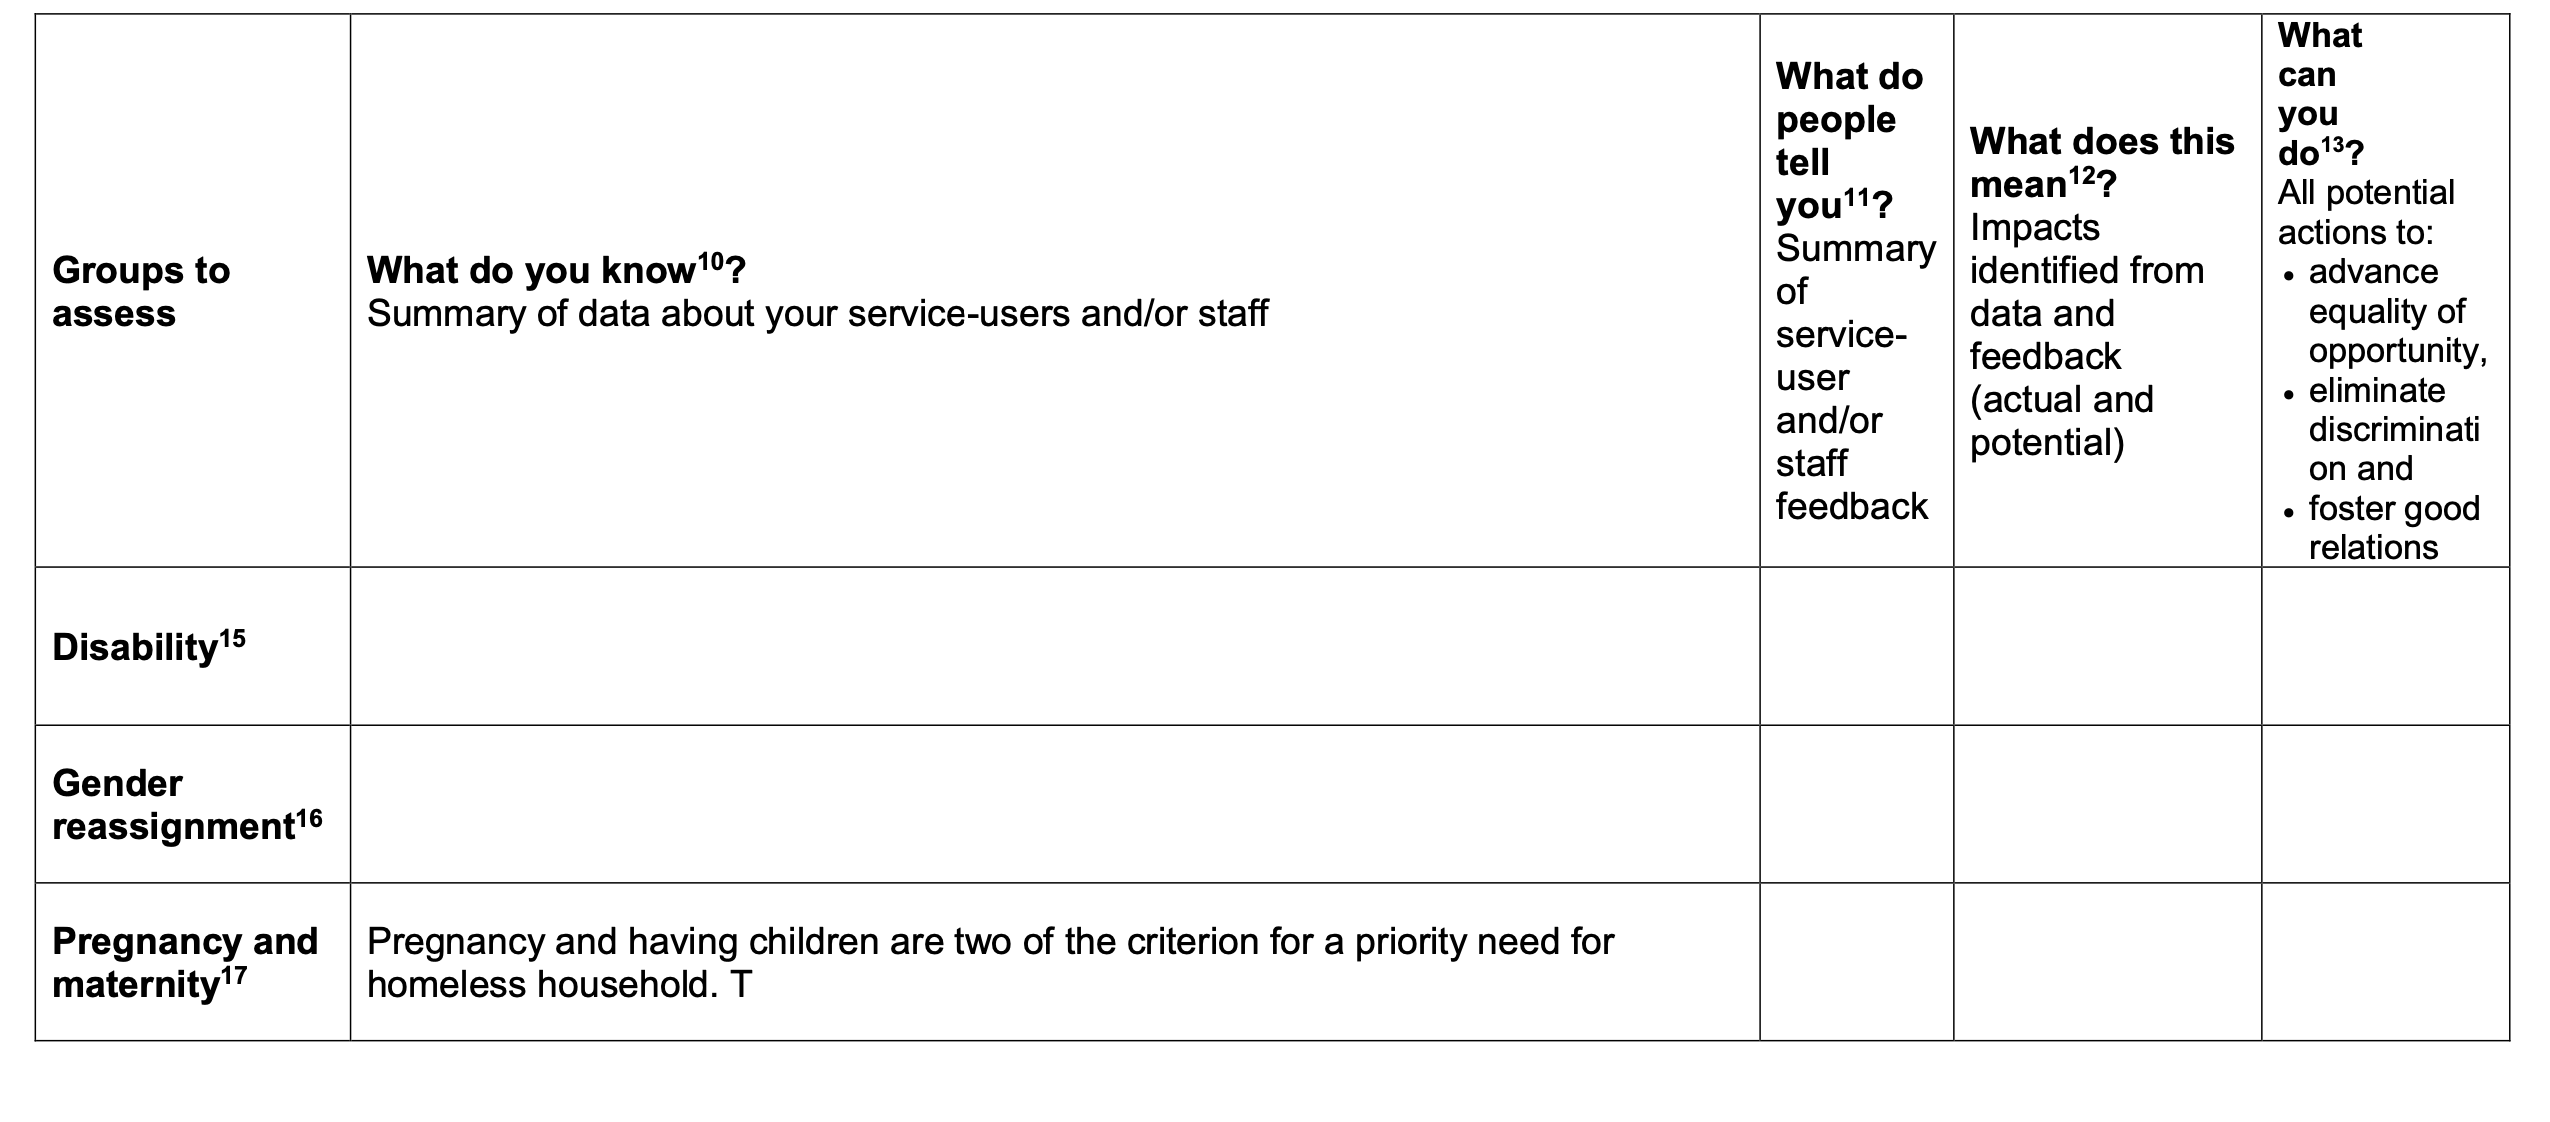 Allocations Policy Equality Impact Assessment 2018: Disability section left blank. no one consulted